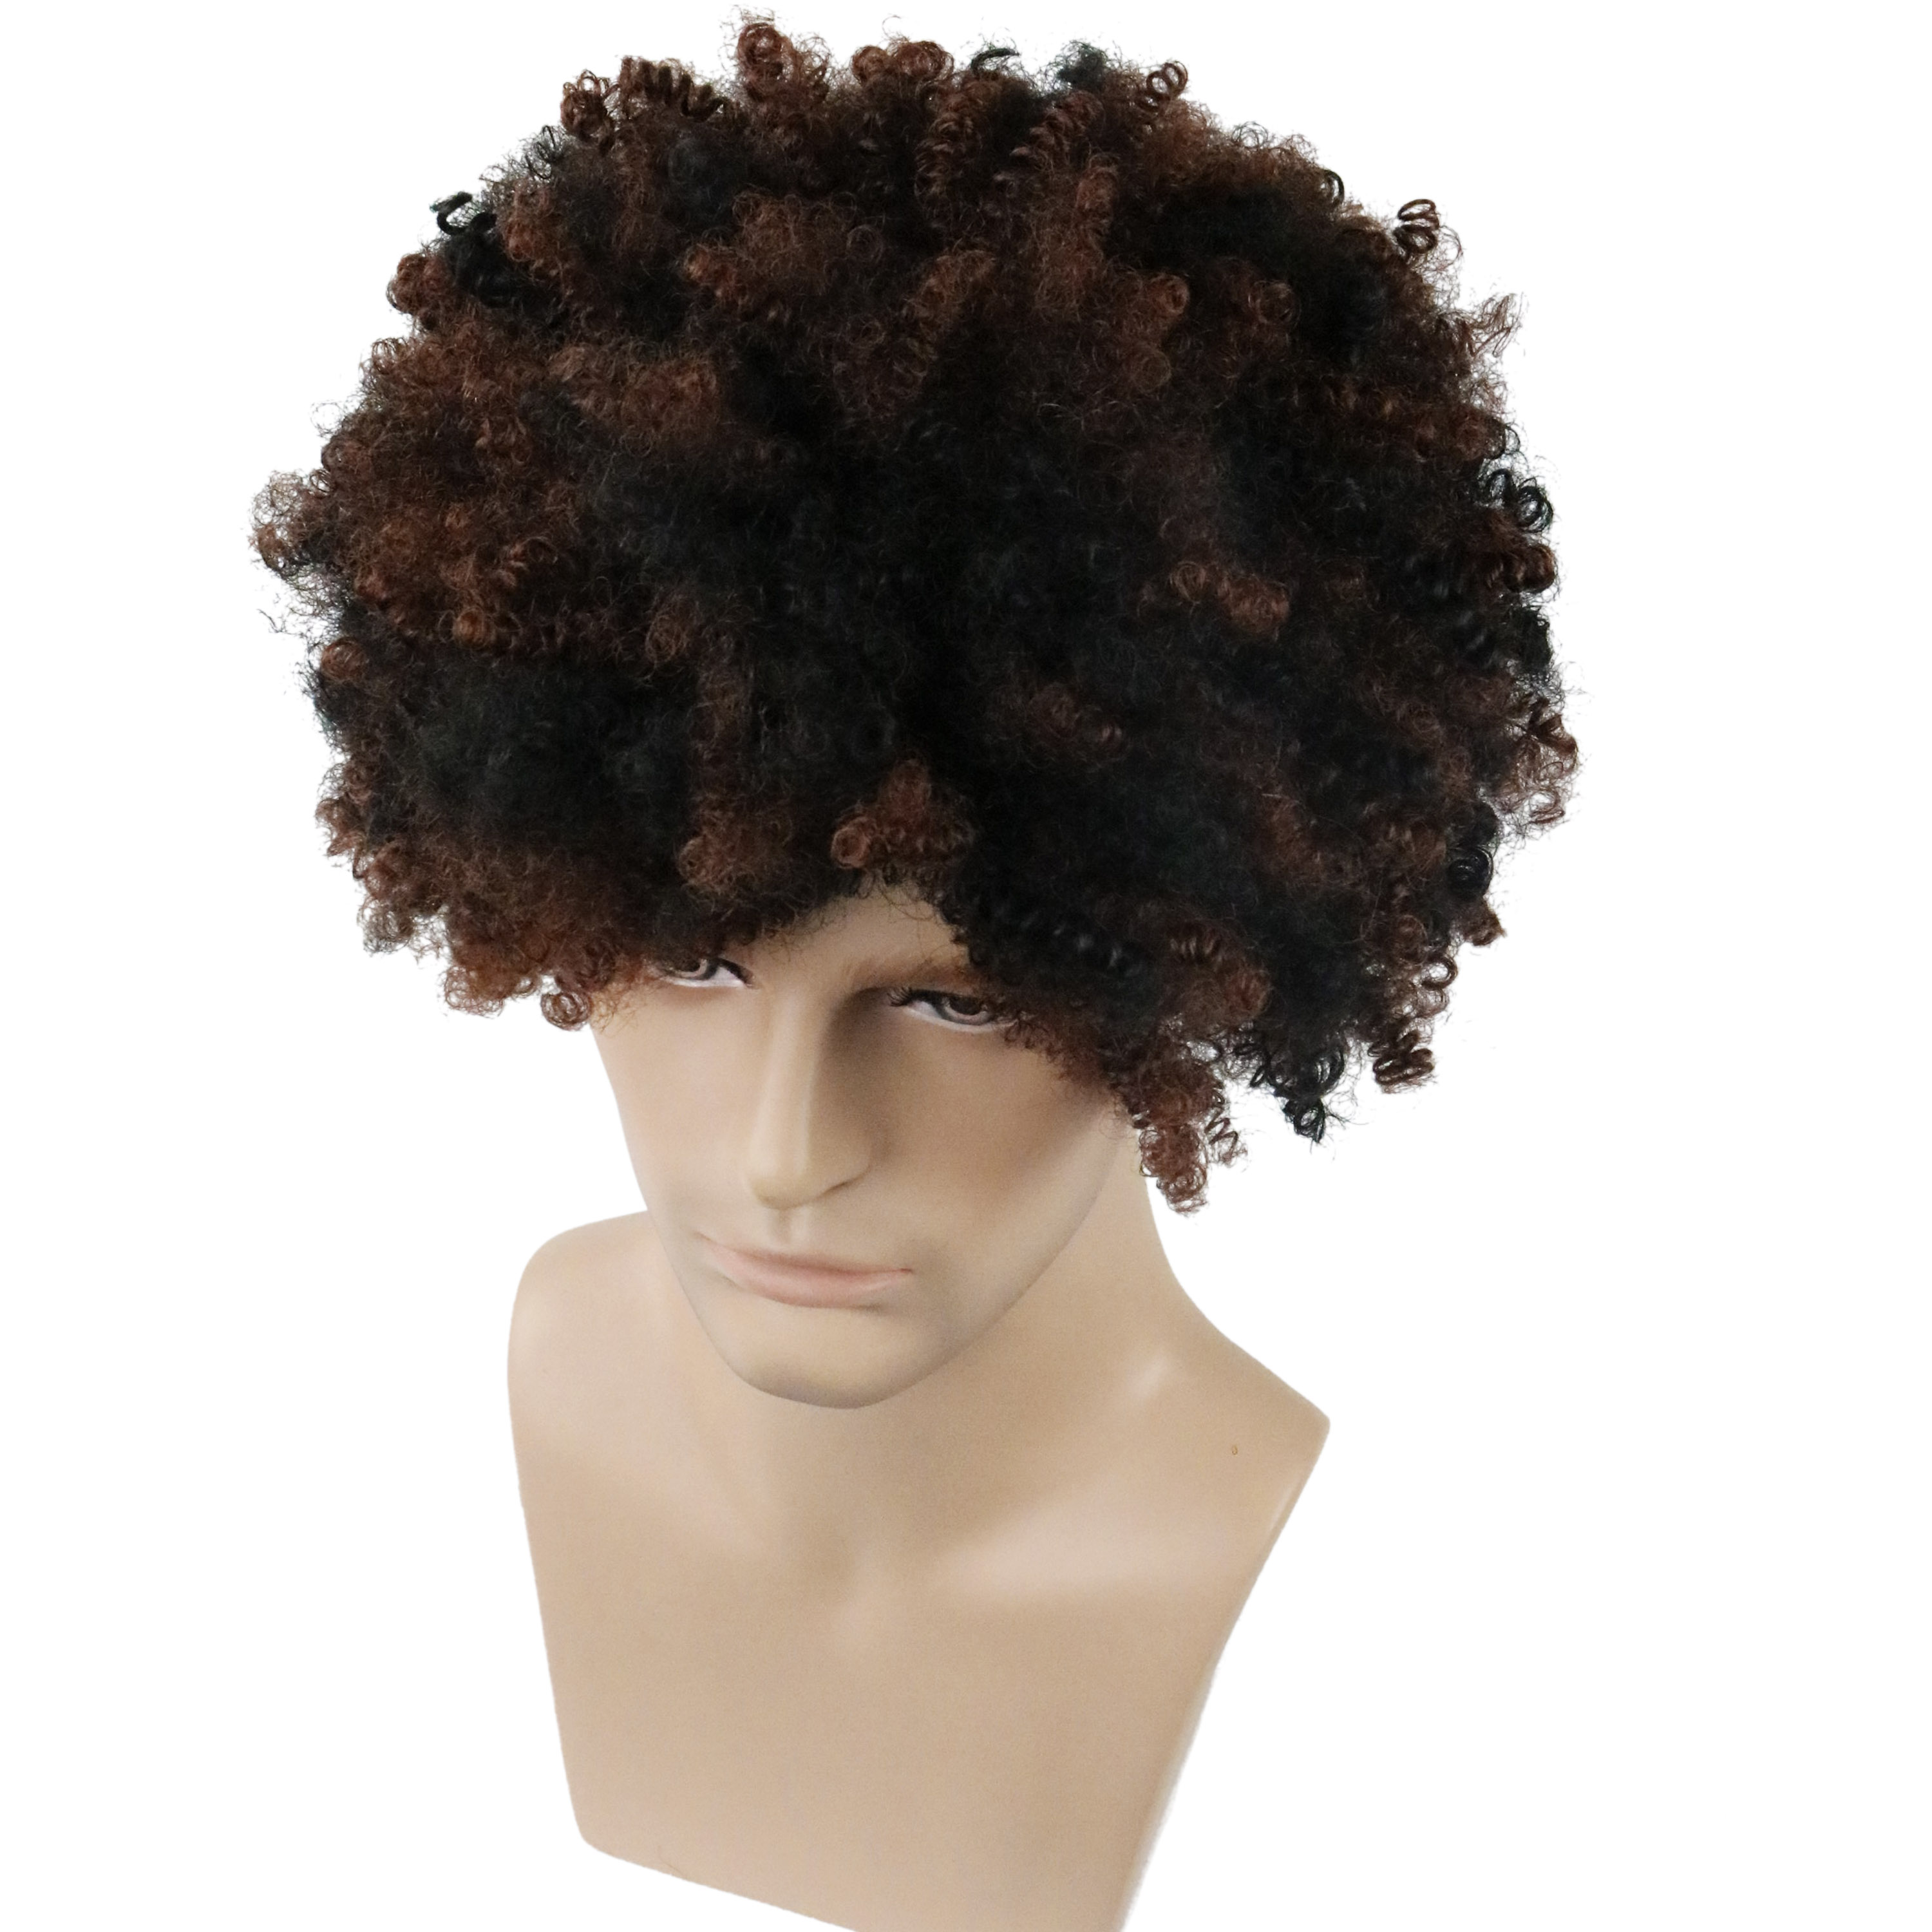 Men's Short Afro Curly Synthetic Hair Capless Wigs Black&Brown Mixed Color 12inch